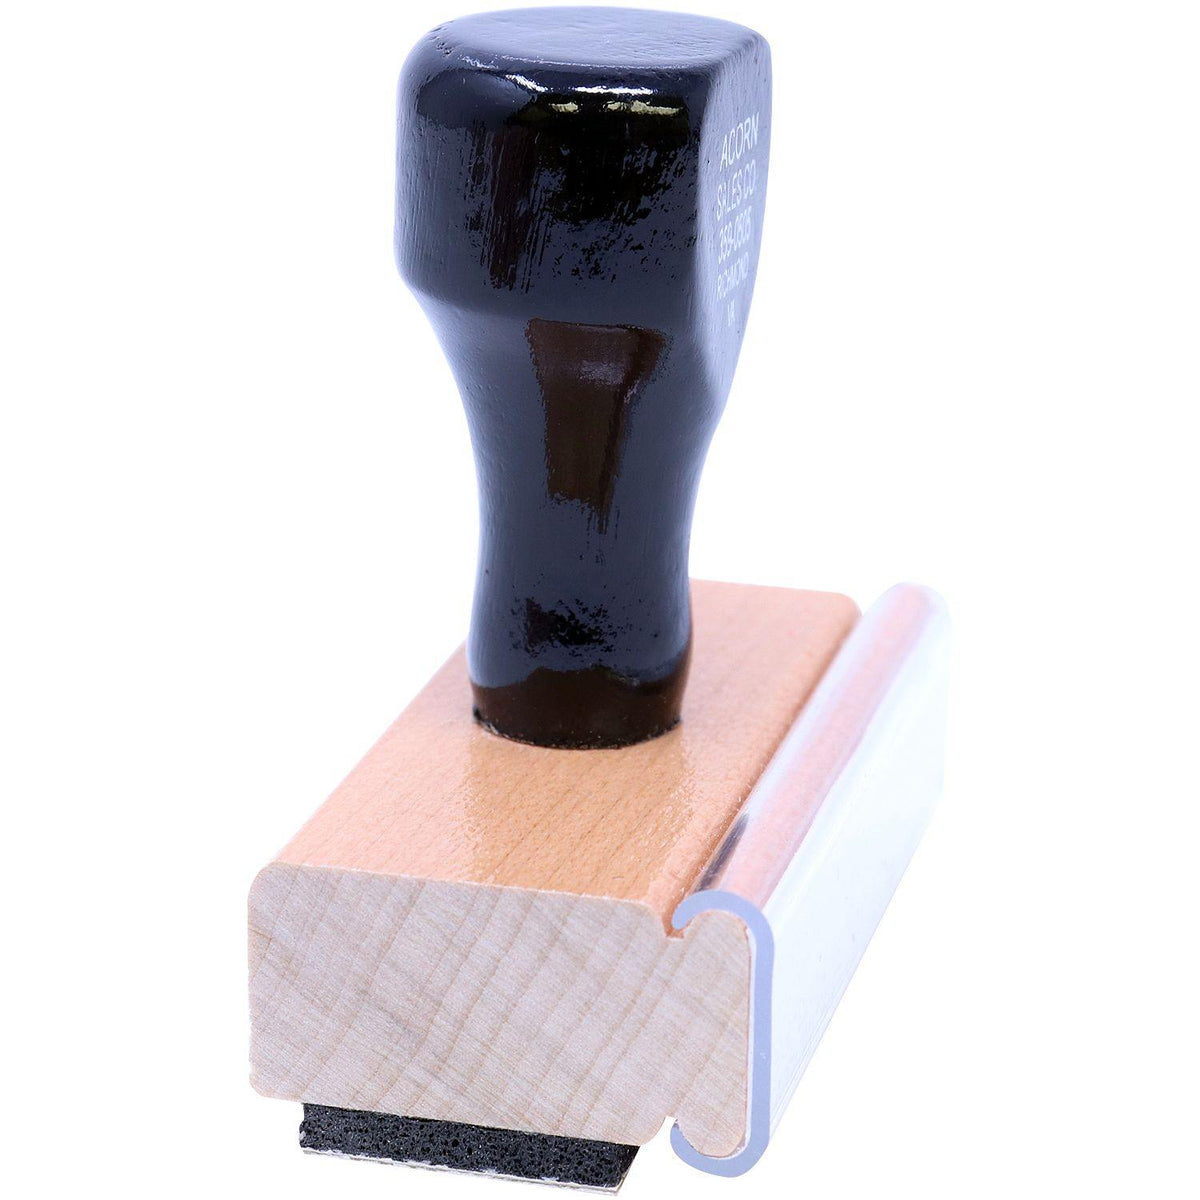 Side View of Great Progress Rubber Stamp at an Angle